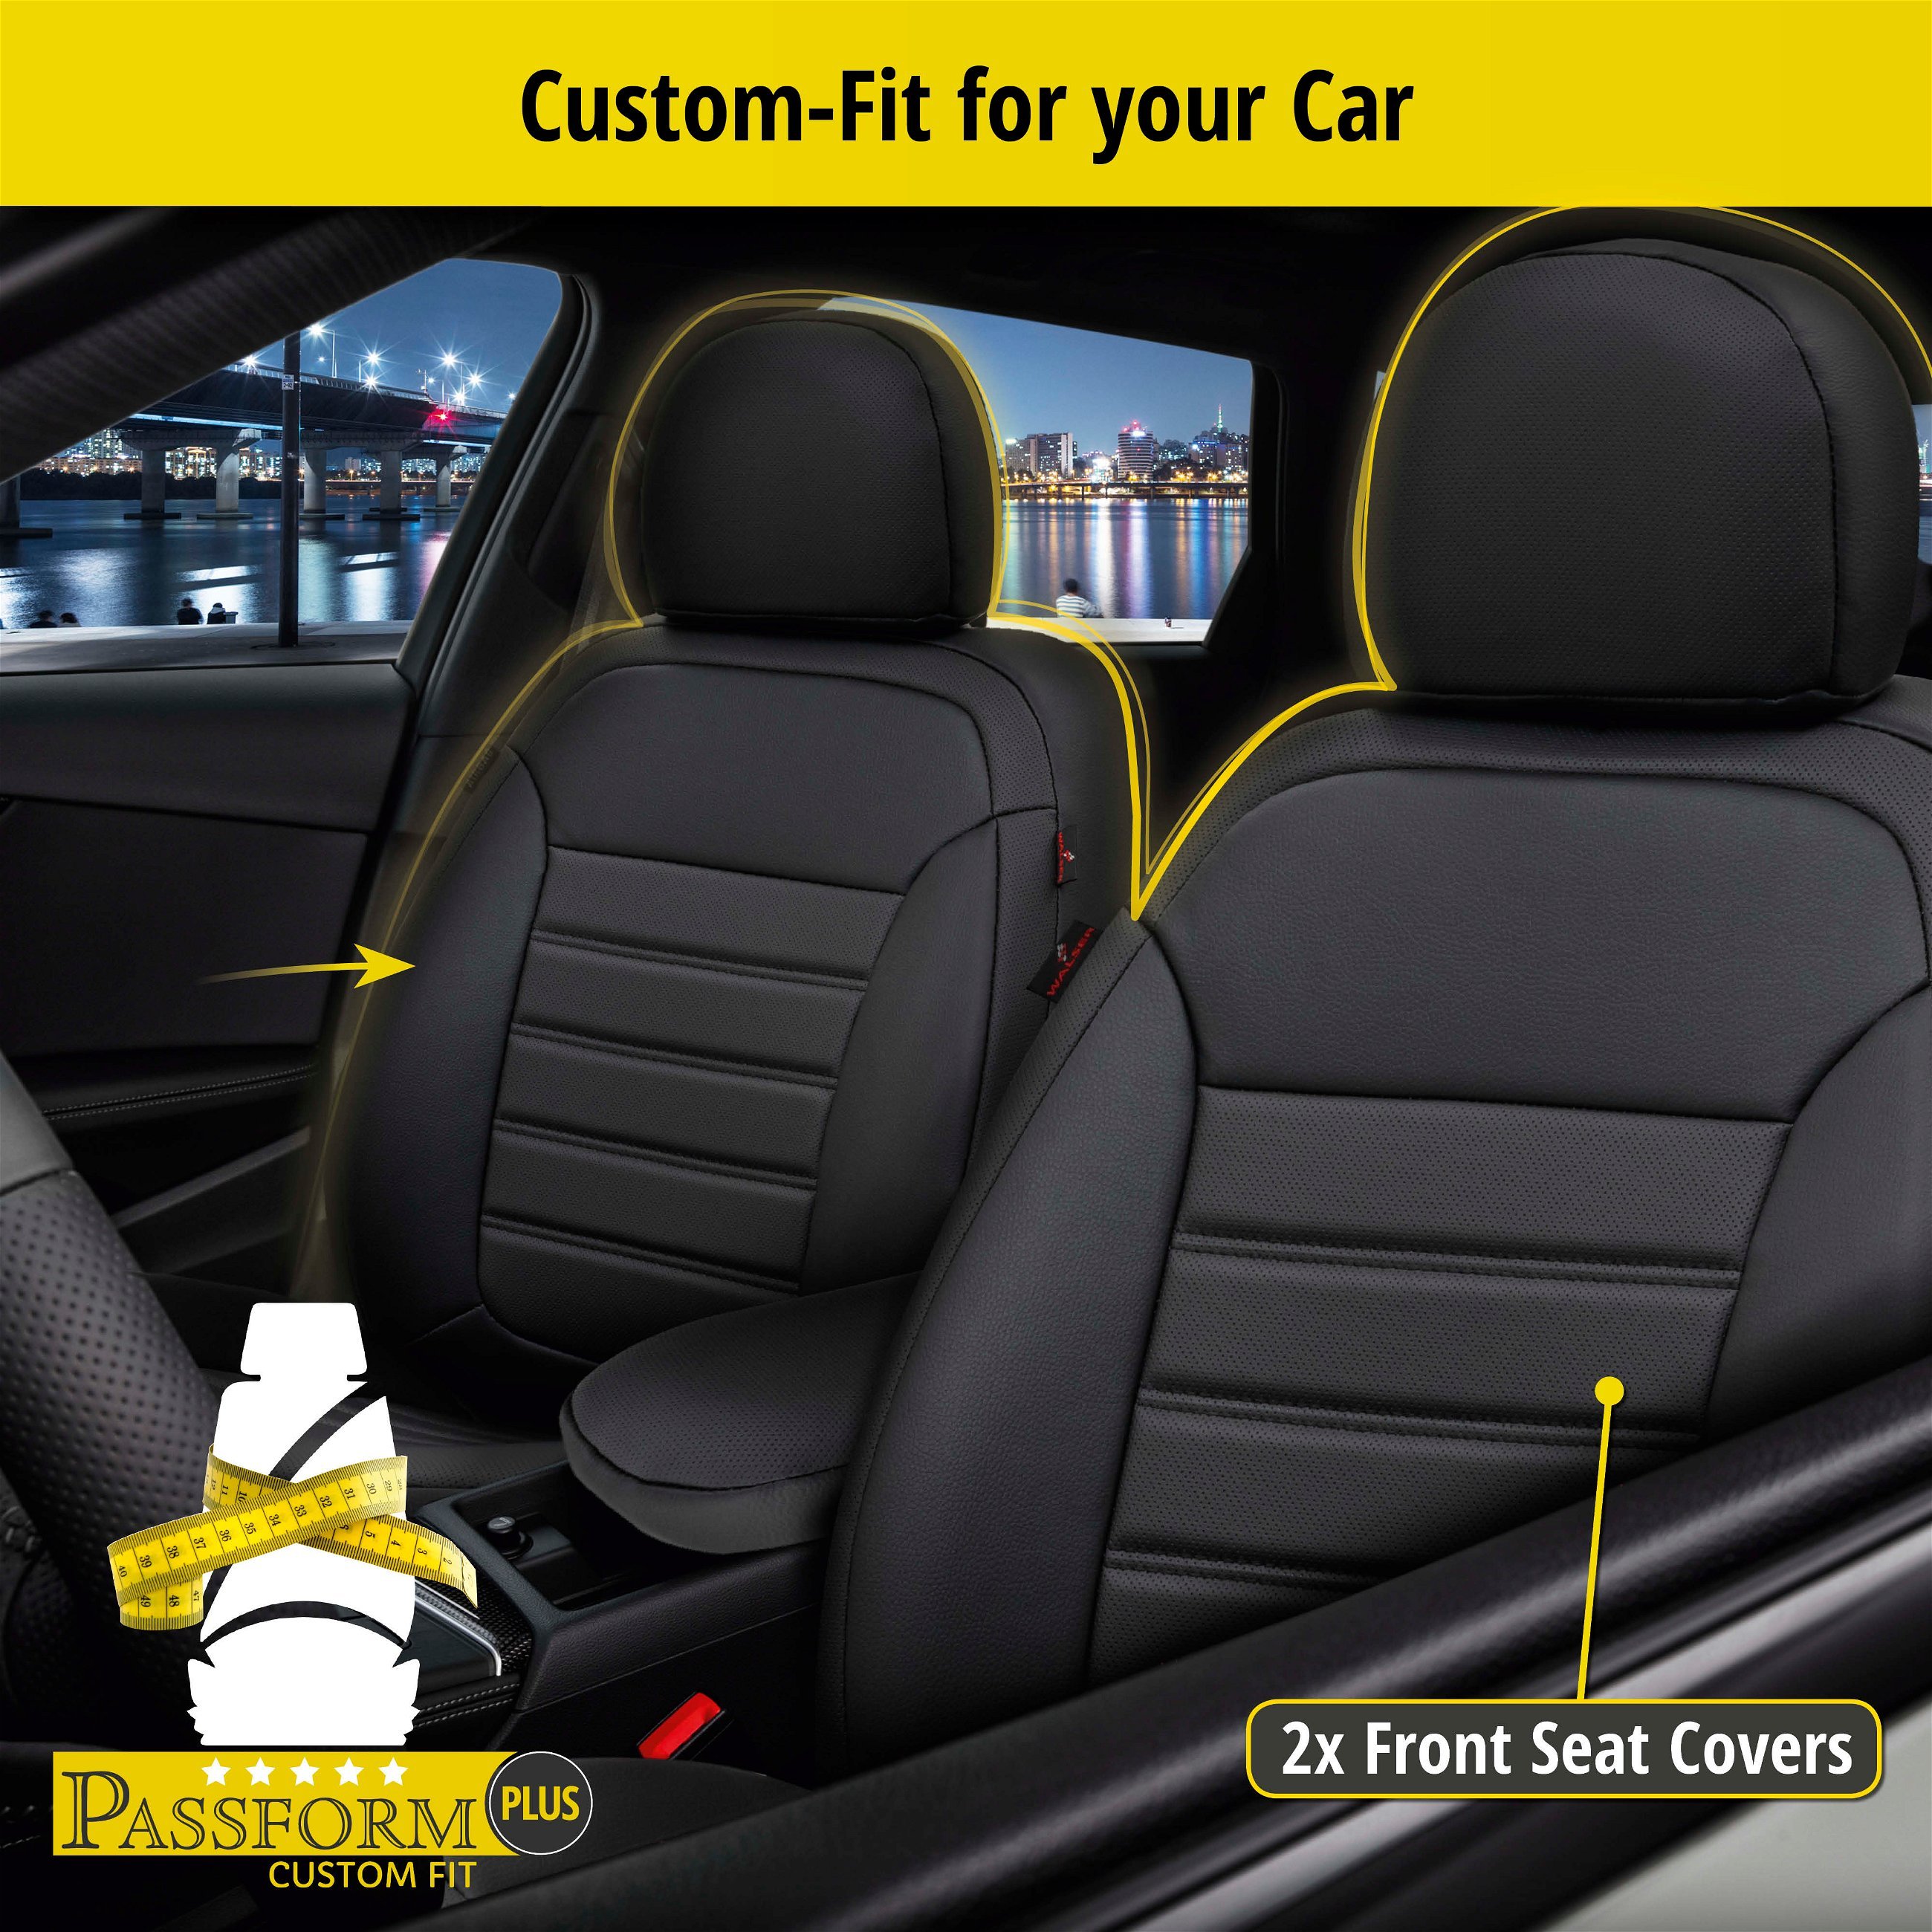 Seat Cover Robusto for Mazda CX-3 (DK) 01/2015-Today, 2 seat covers for normal seats